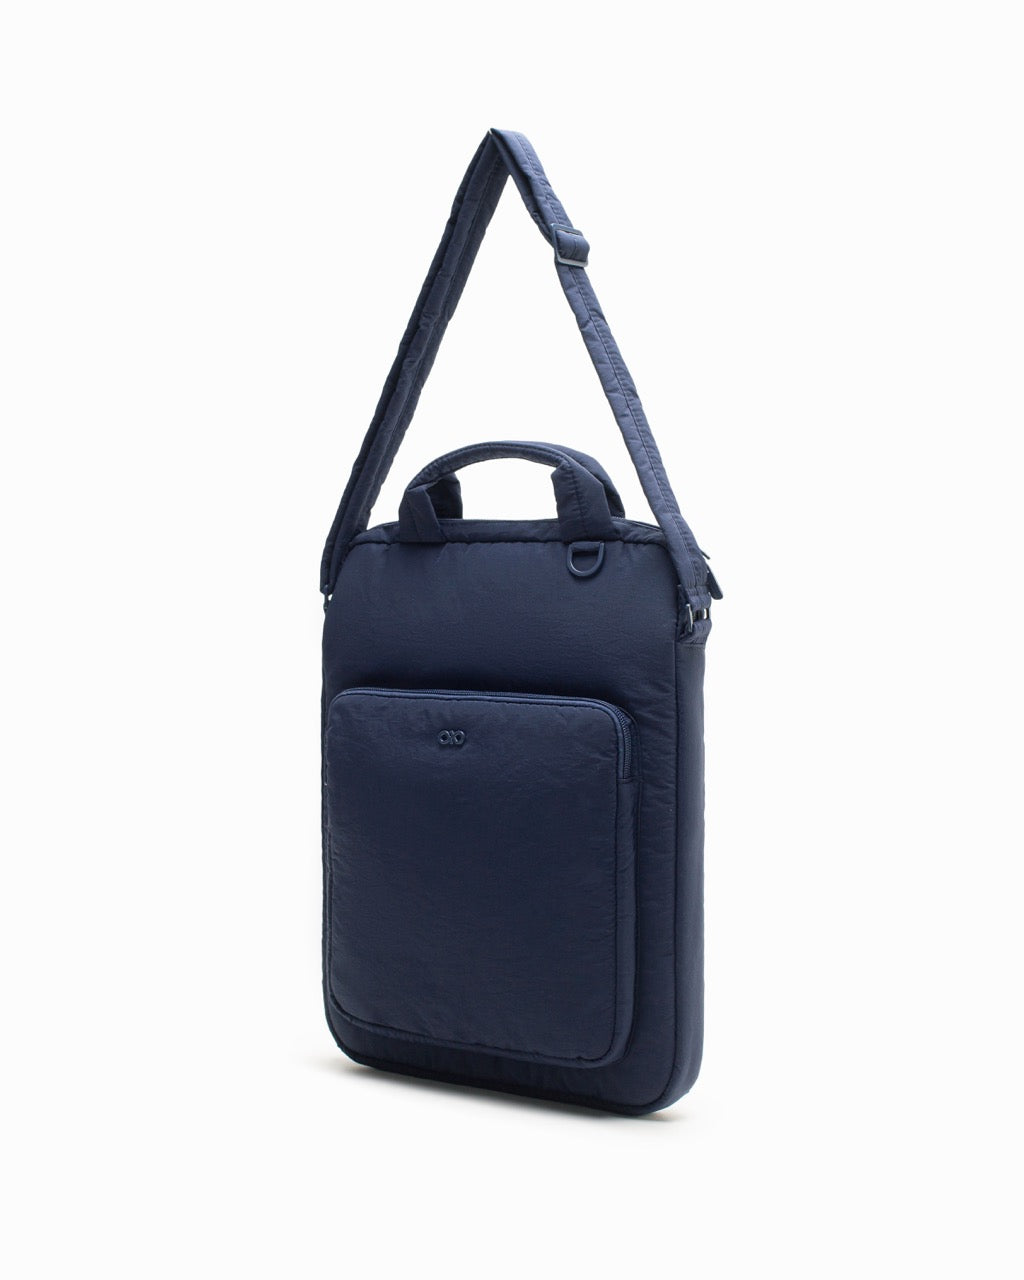 COSY LAPTOP BAG IN MIDNIGHT